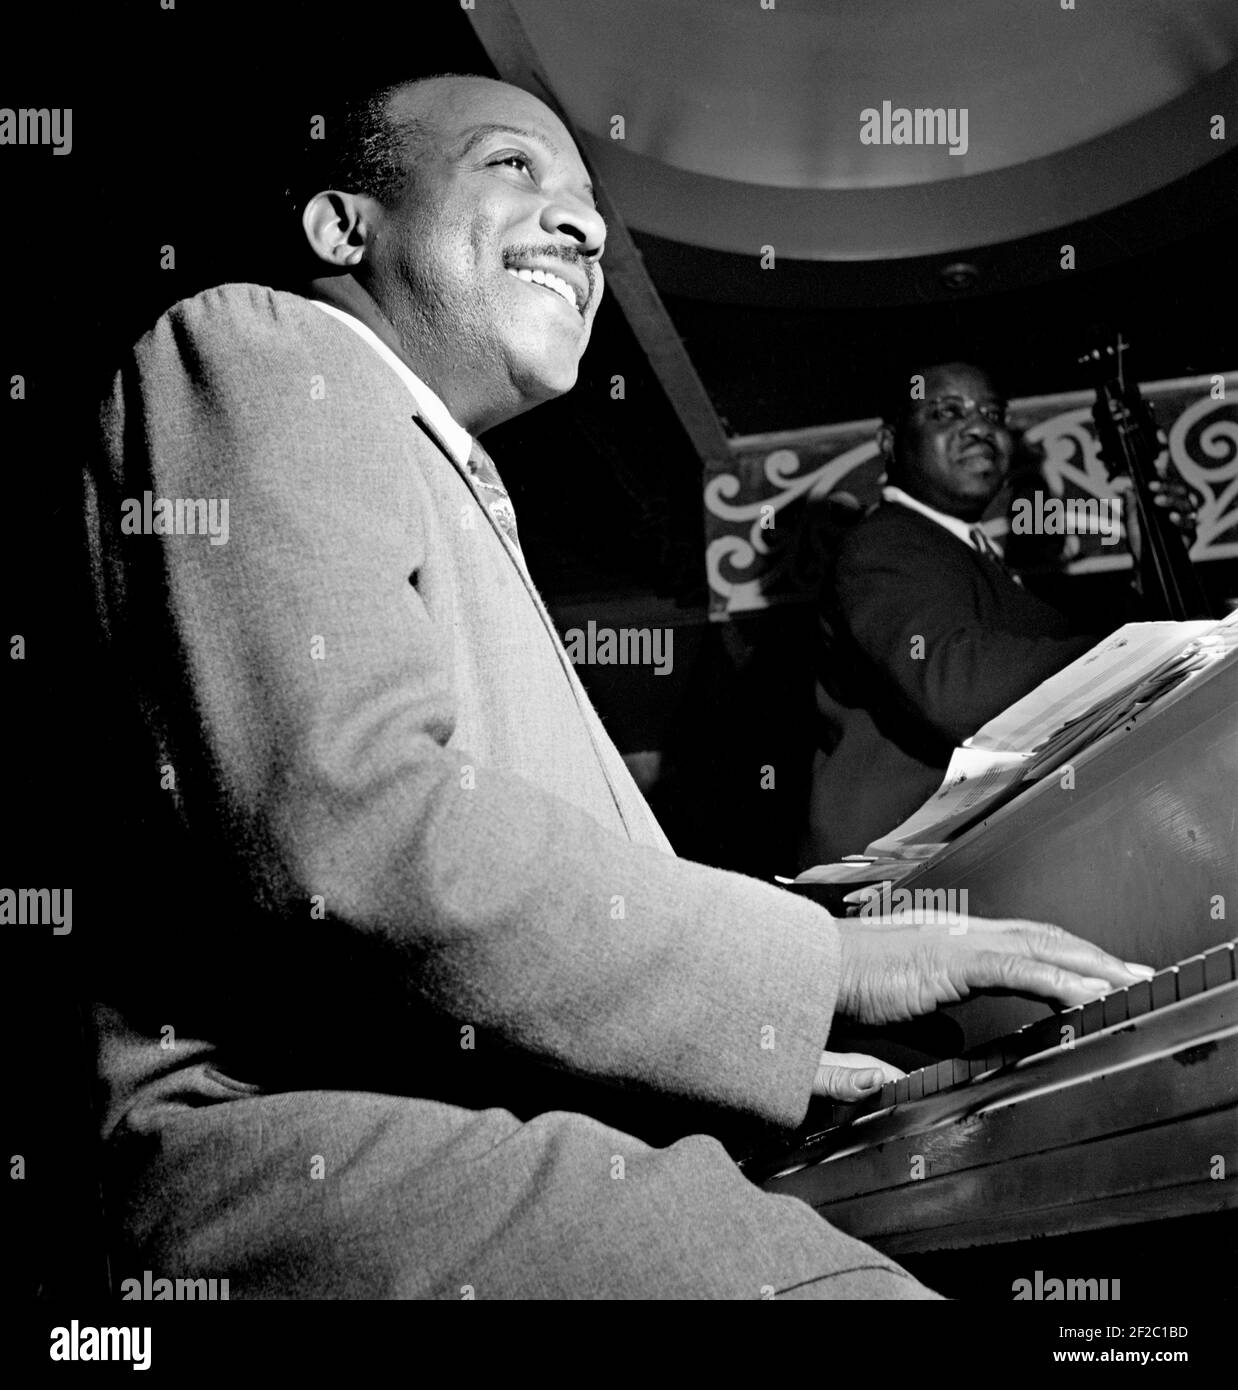 Count Basie. Portrait of the American jazz pianist, Count Basie (William James Basie, 1904-1984) playing the piano at the Aquarium, New York City, between 1946 and 1948. Stock Photo